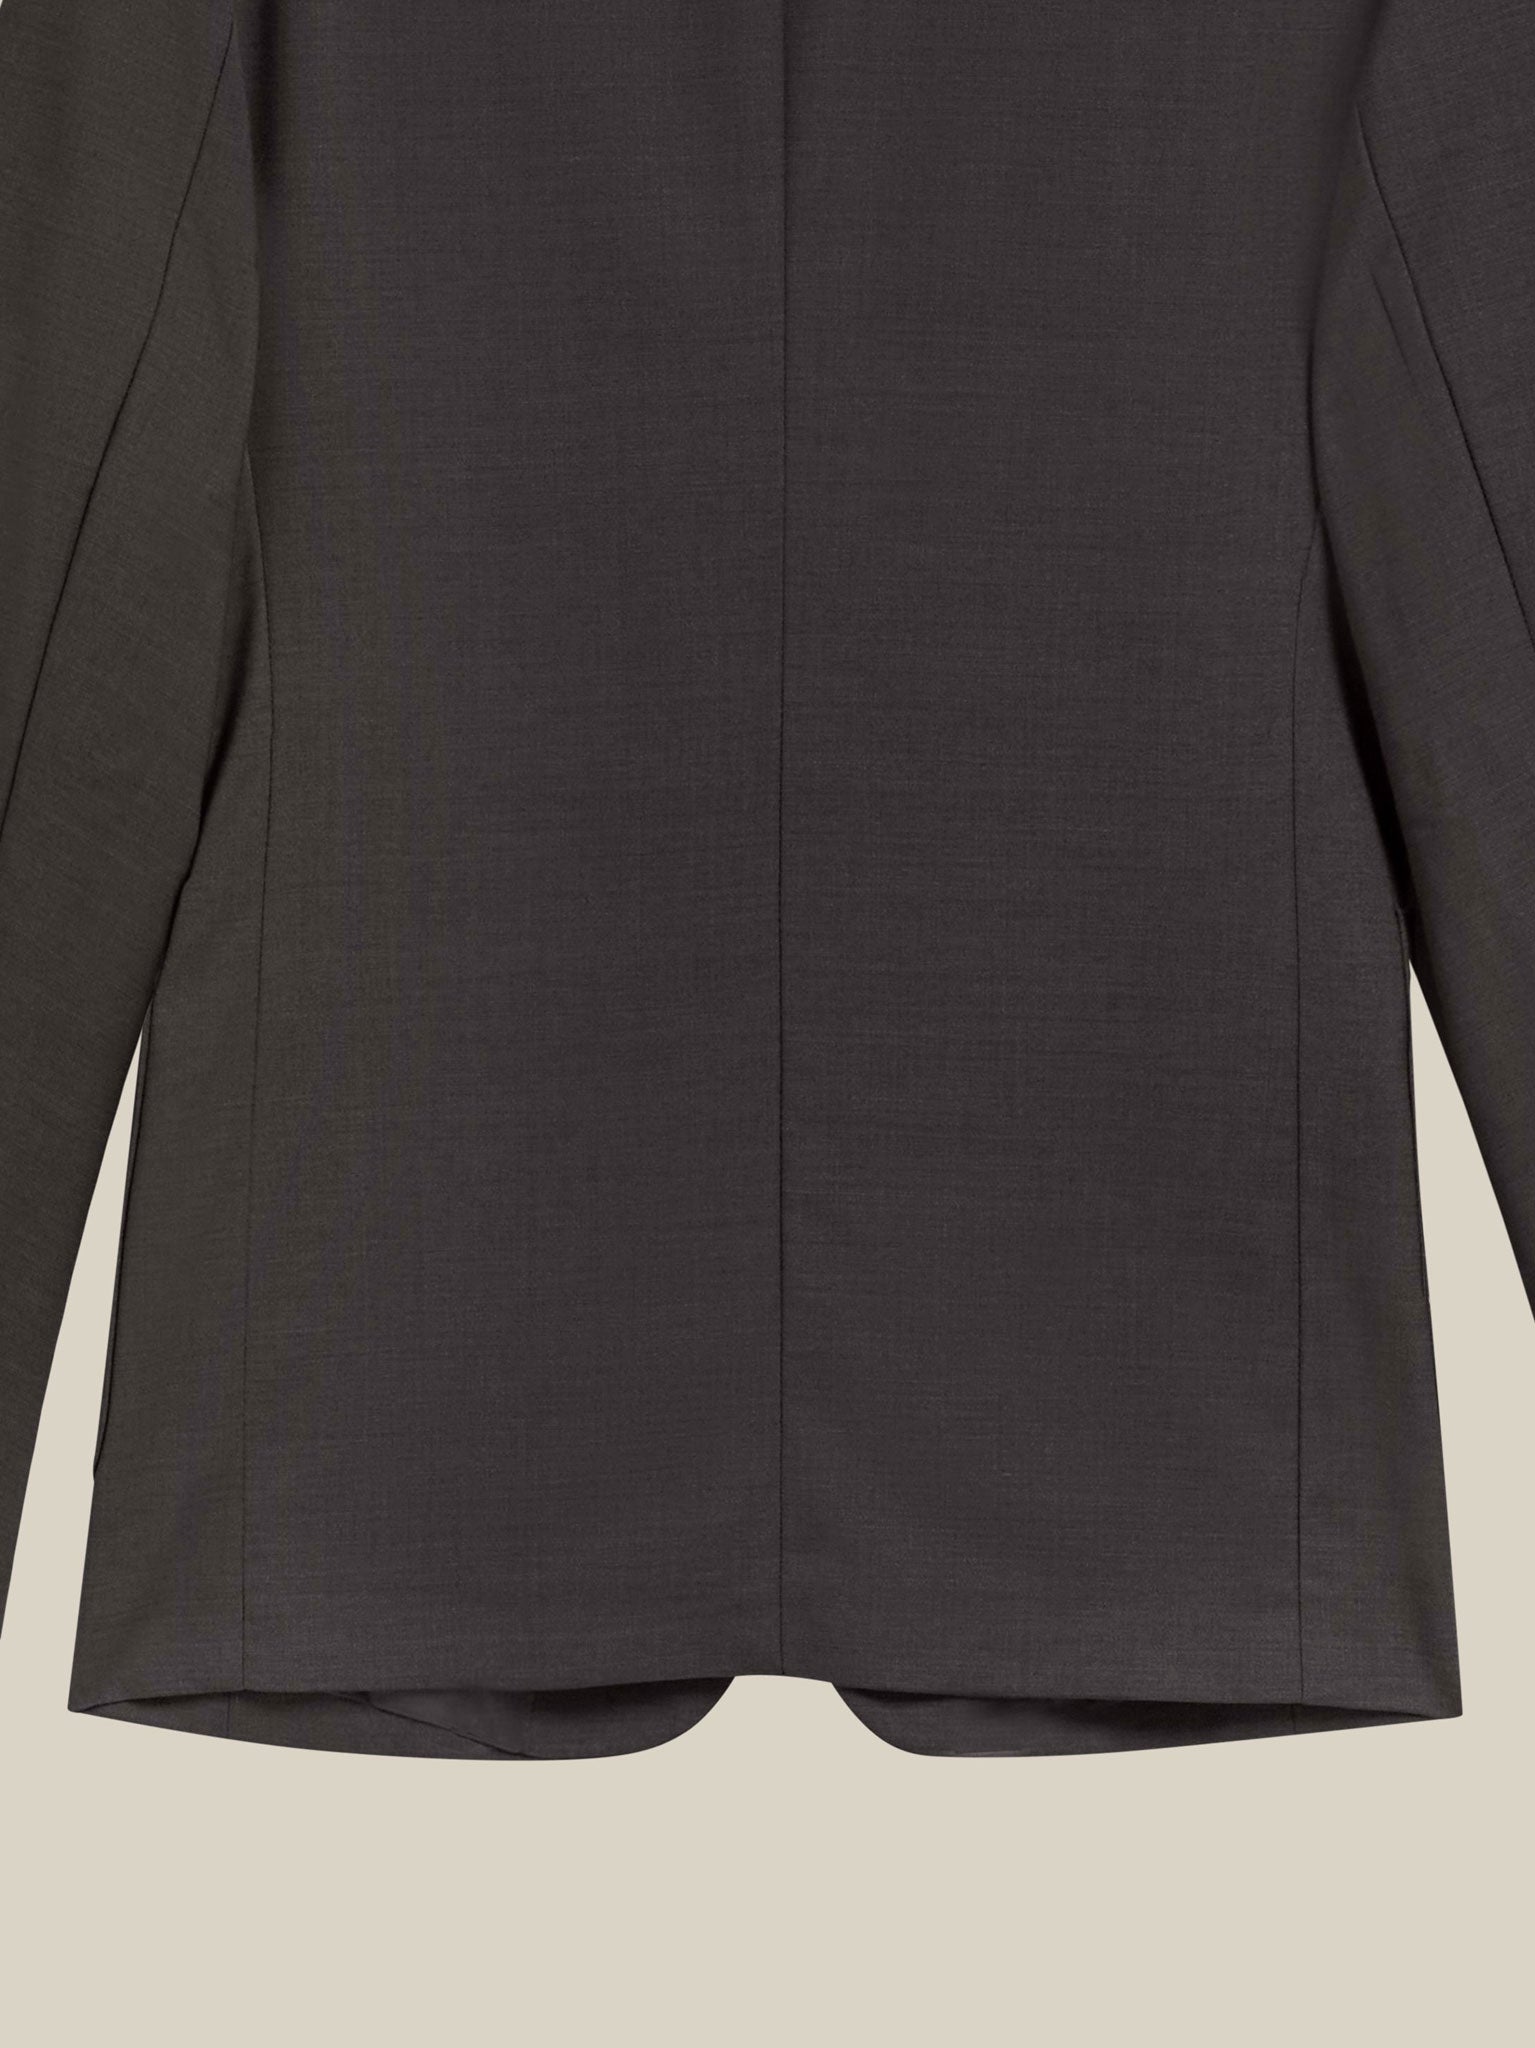 Tailored men's grey wool blazer with slim fit and center vent